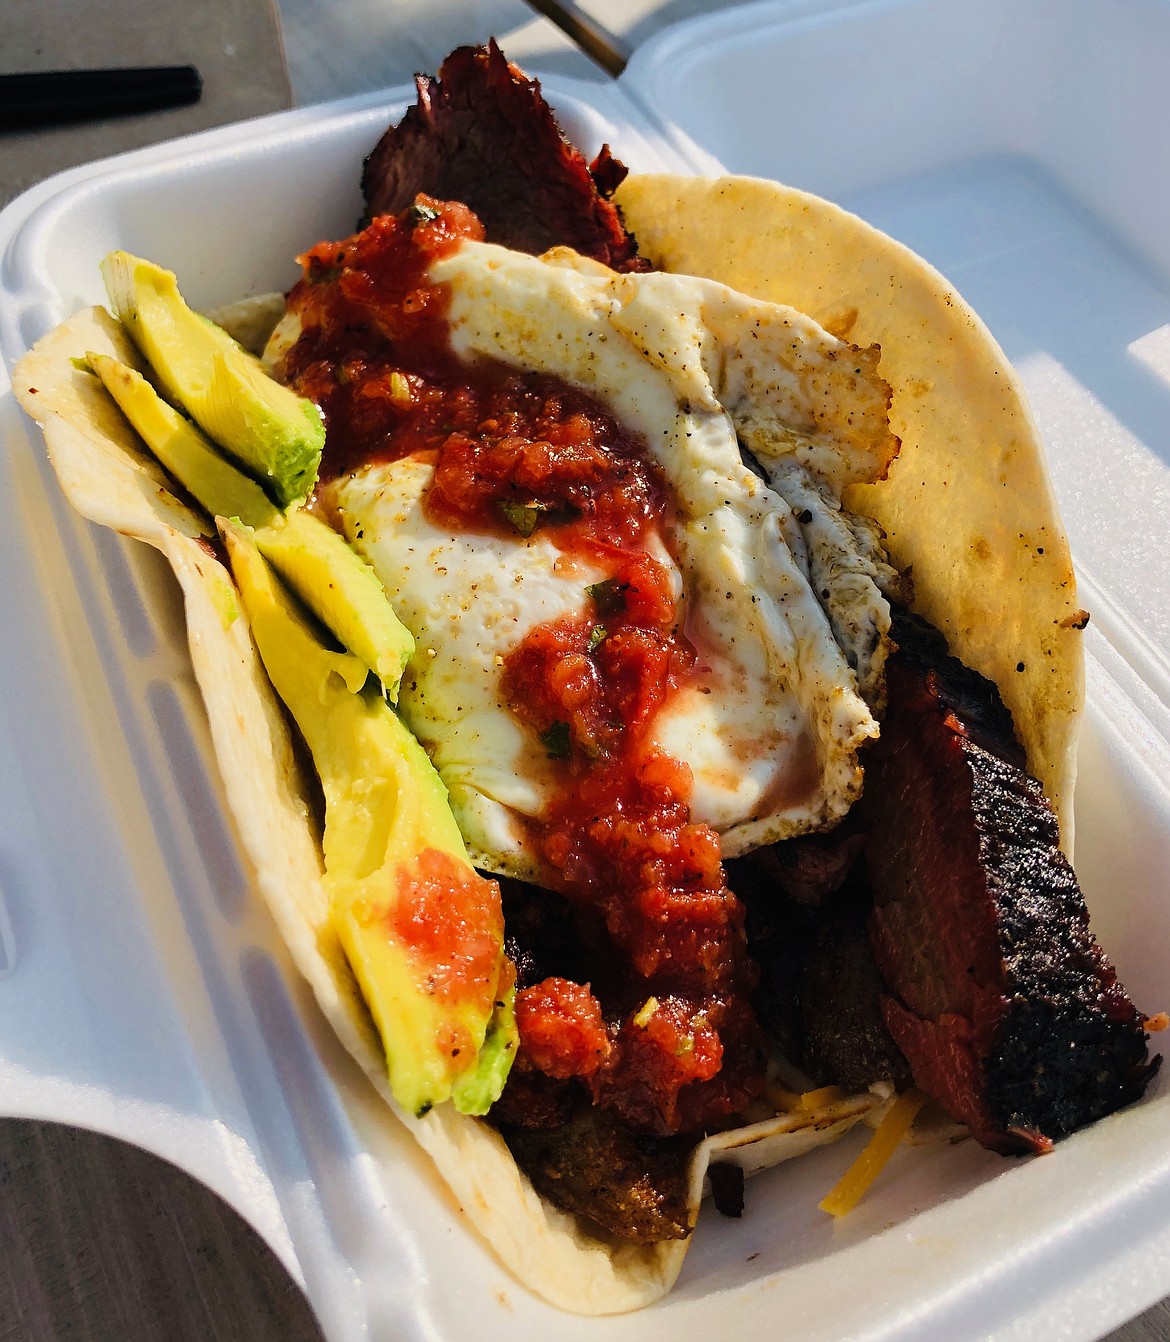 The Lawless Breakfast Taco… An 8-inch flour tortilla filled with chorizo, smoked potatoes, homemade salsa, avocado and smoked brisket. It's OK if you're drooling, I did too.